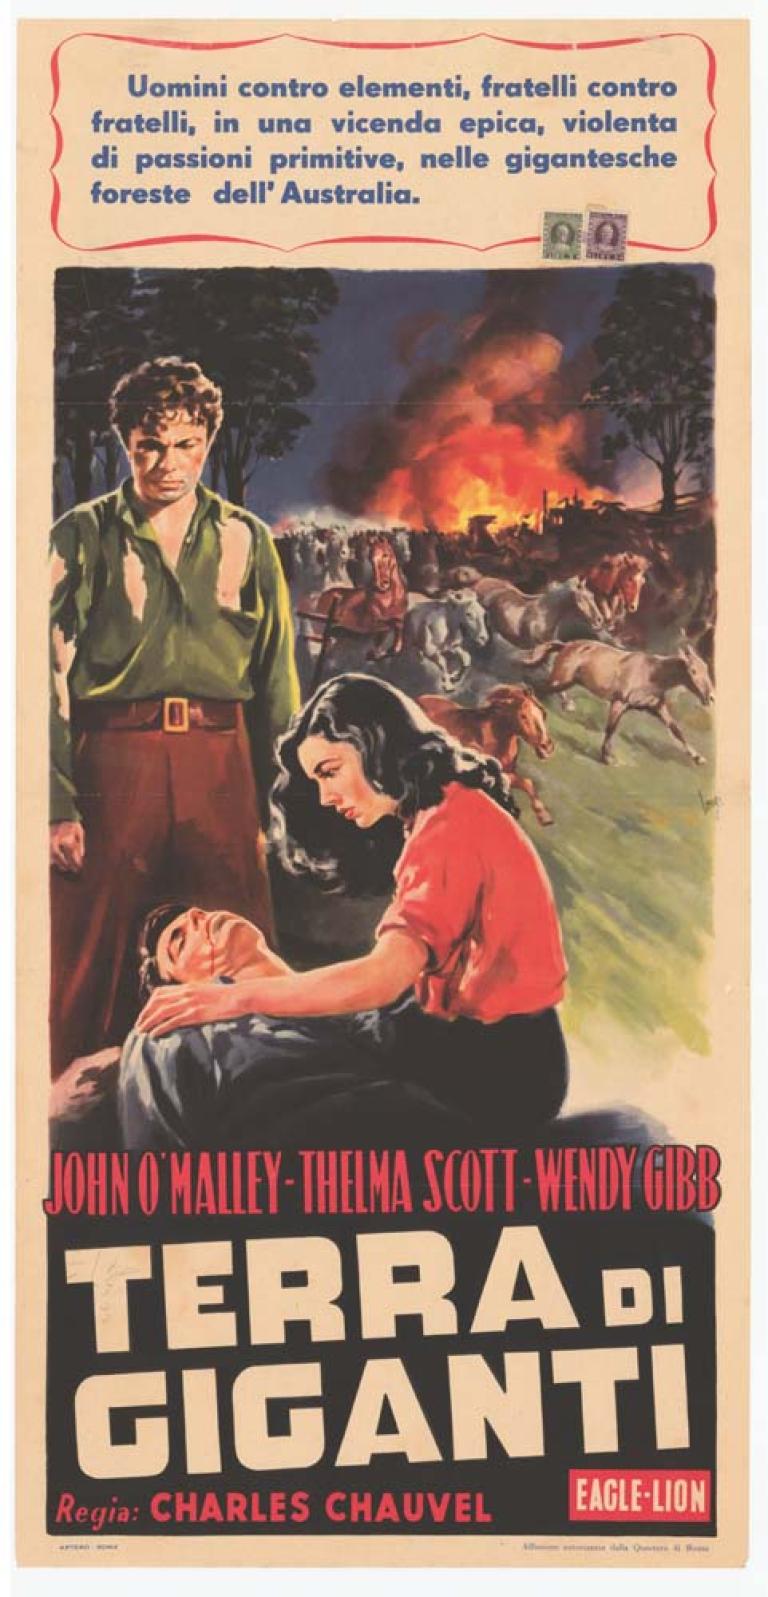 In the foreground is of a woman in a red shirt tending an injured man with another man in a green shirt looking on. In the background are horses stampeding from a fire. 